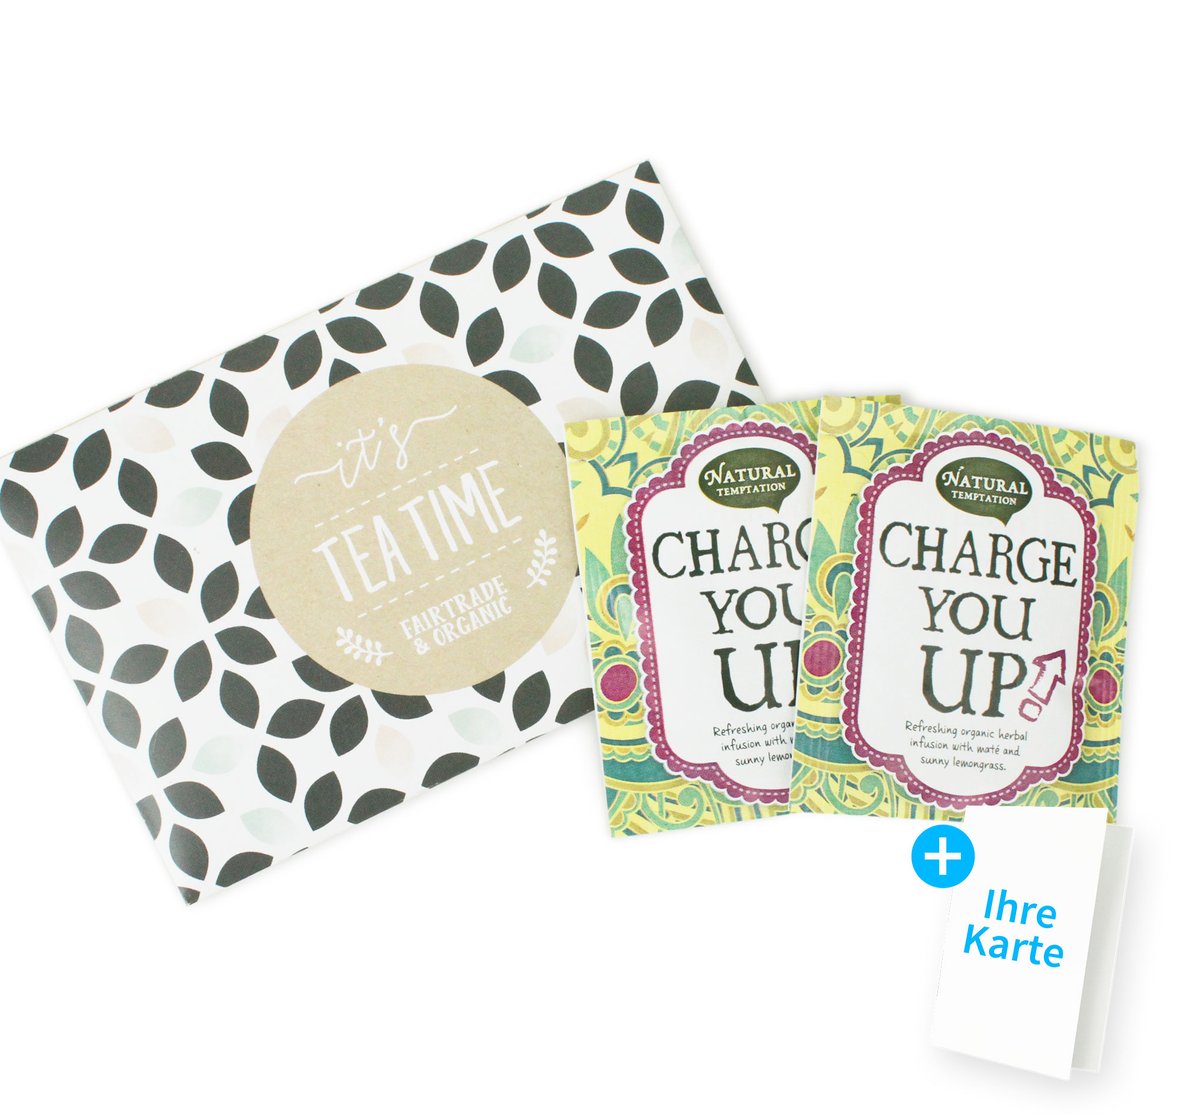 Charge-You-Up-Tee 2 Beutel